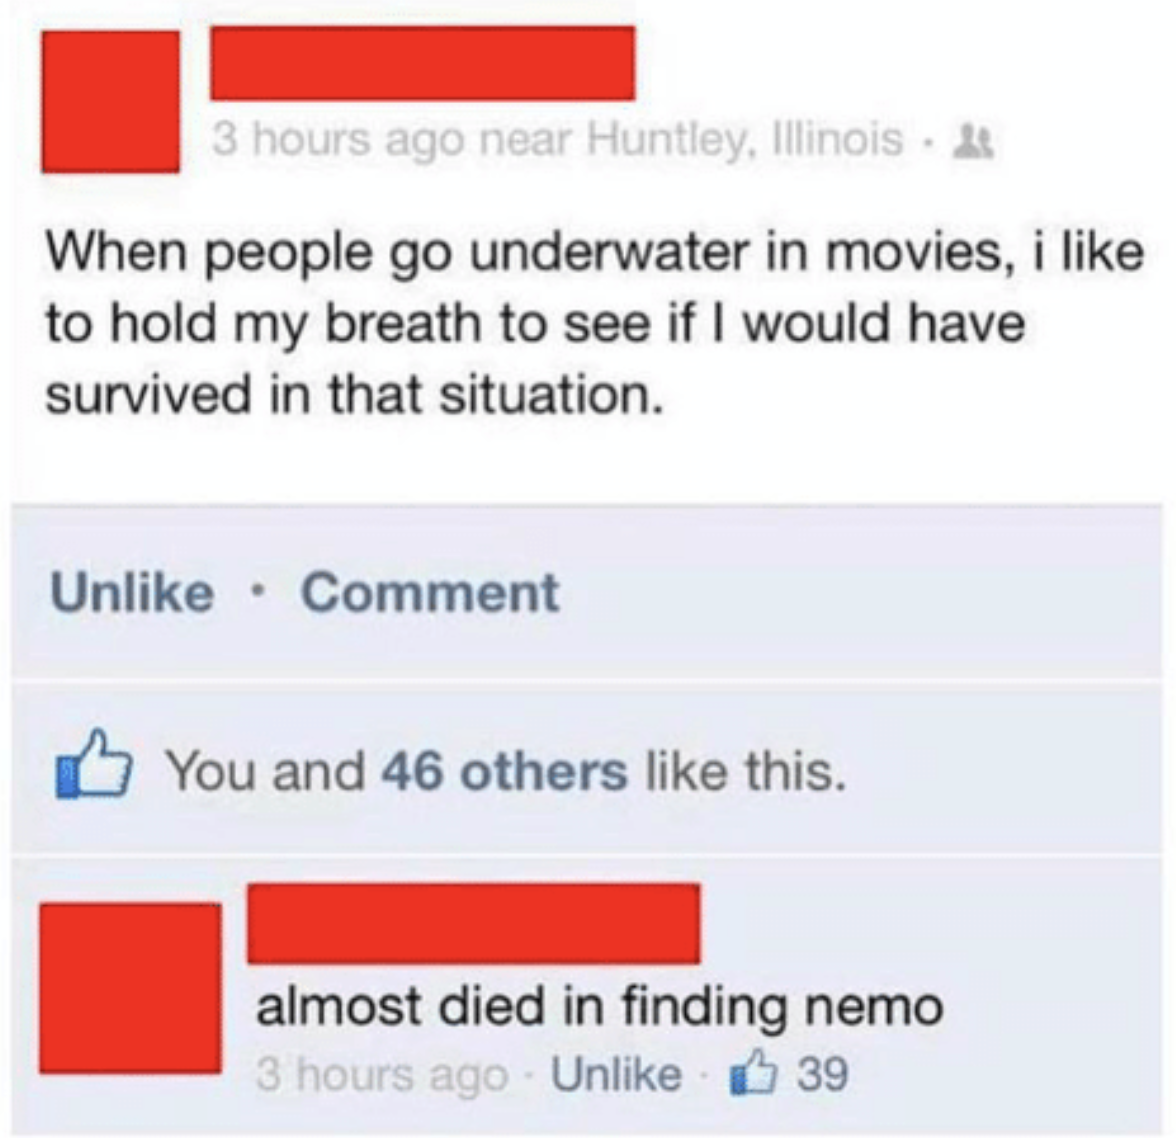 someone who says that when people go under water in movies they hold their breath